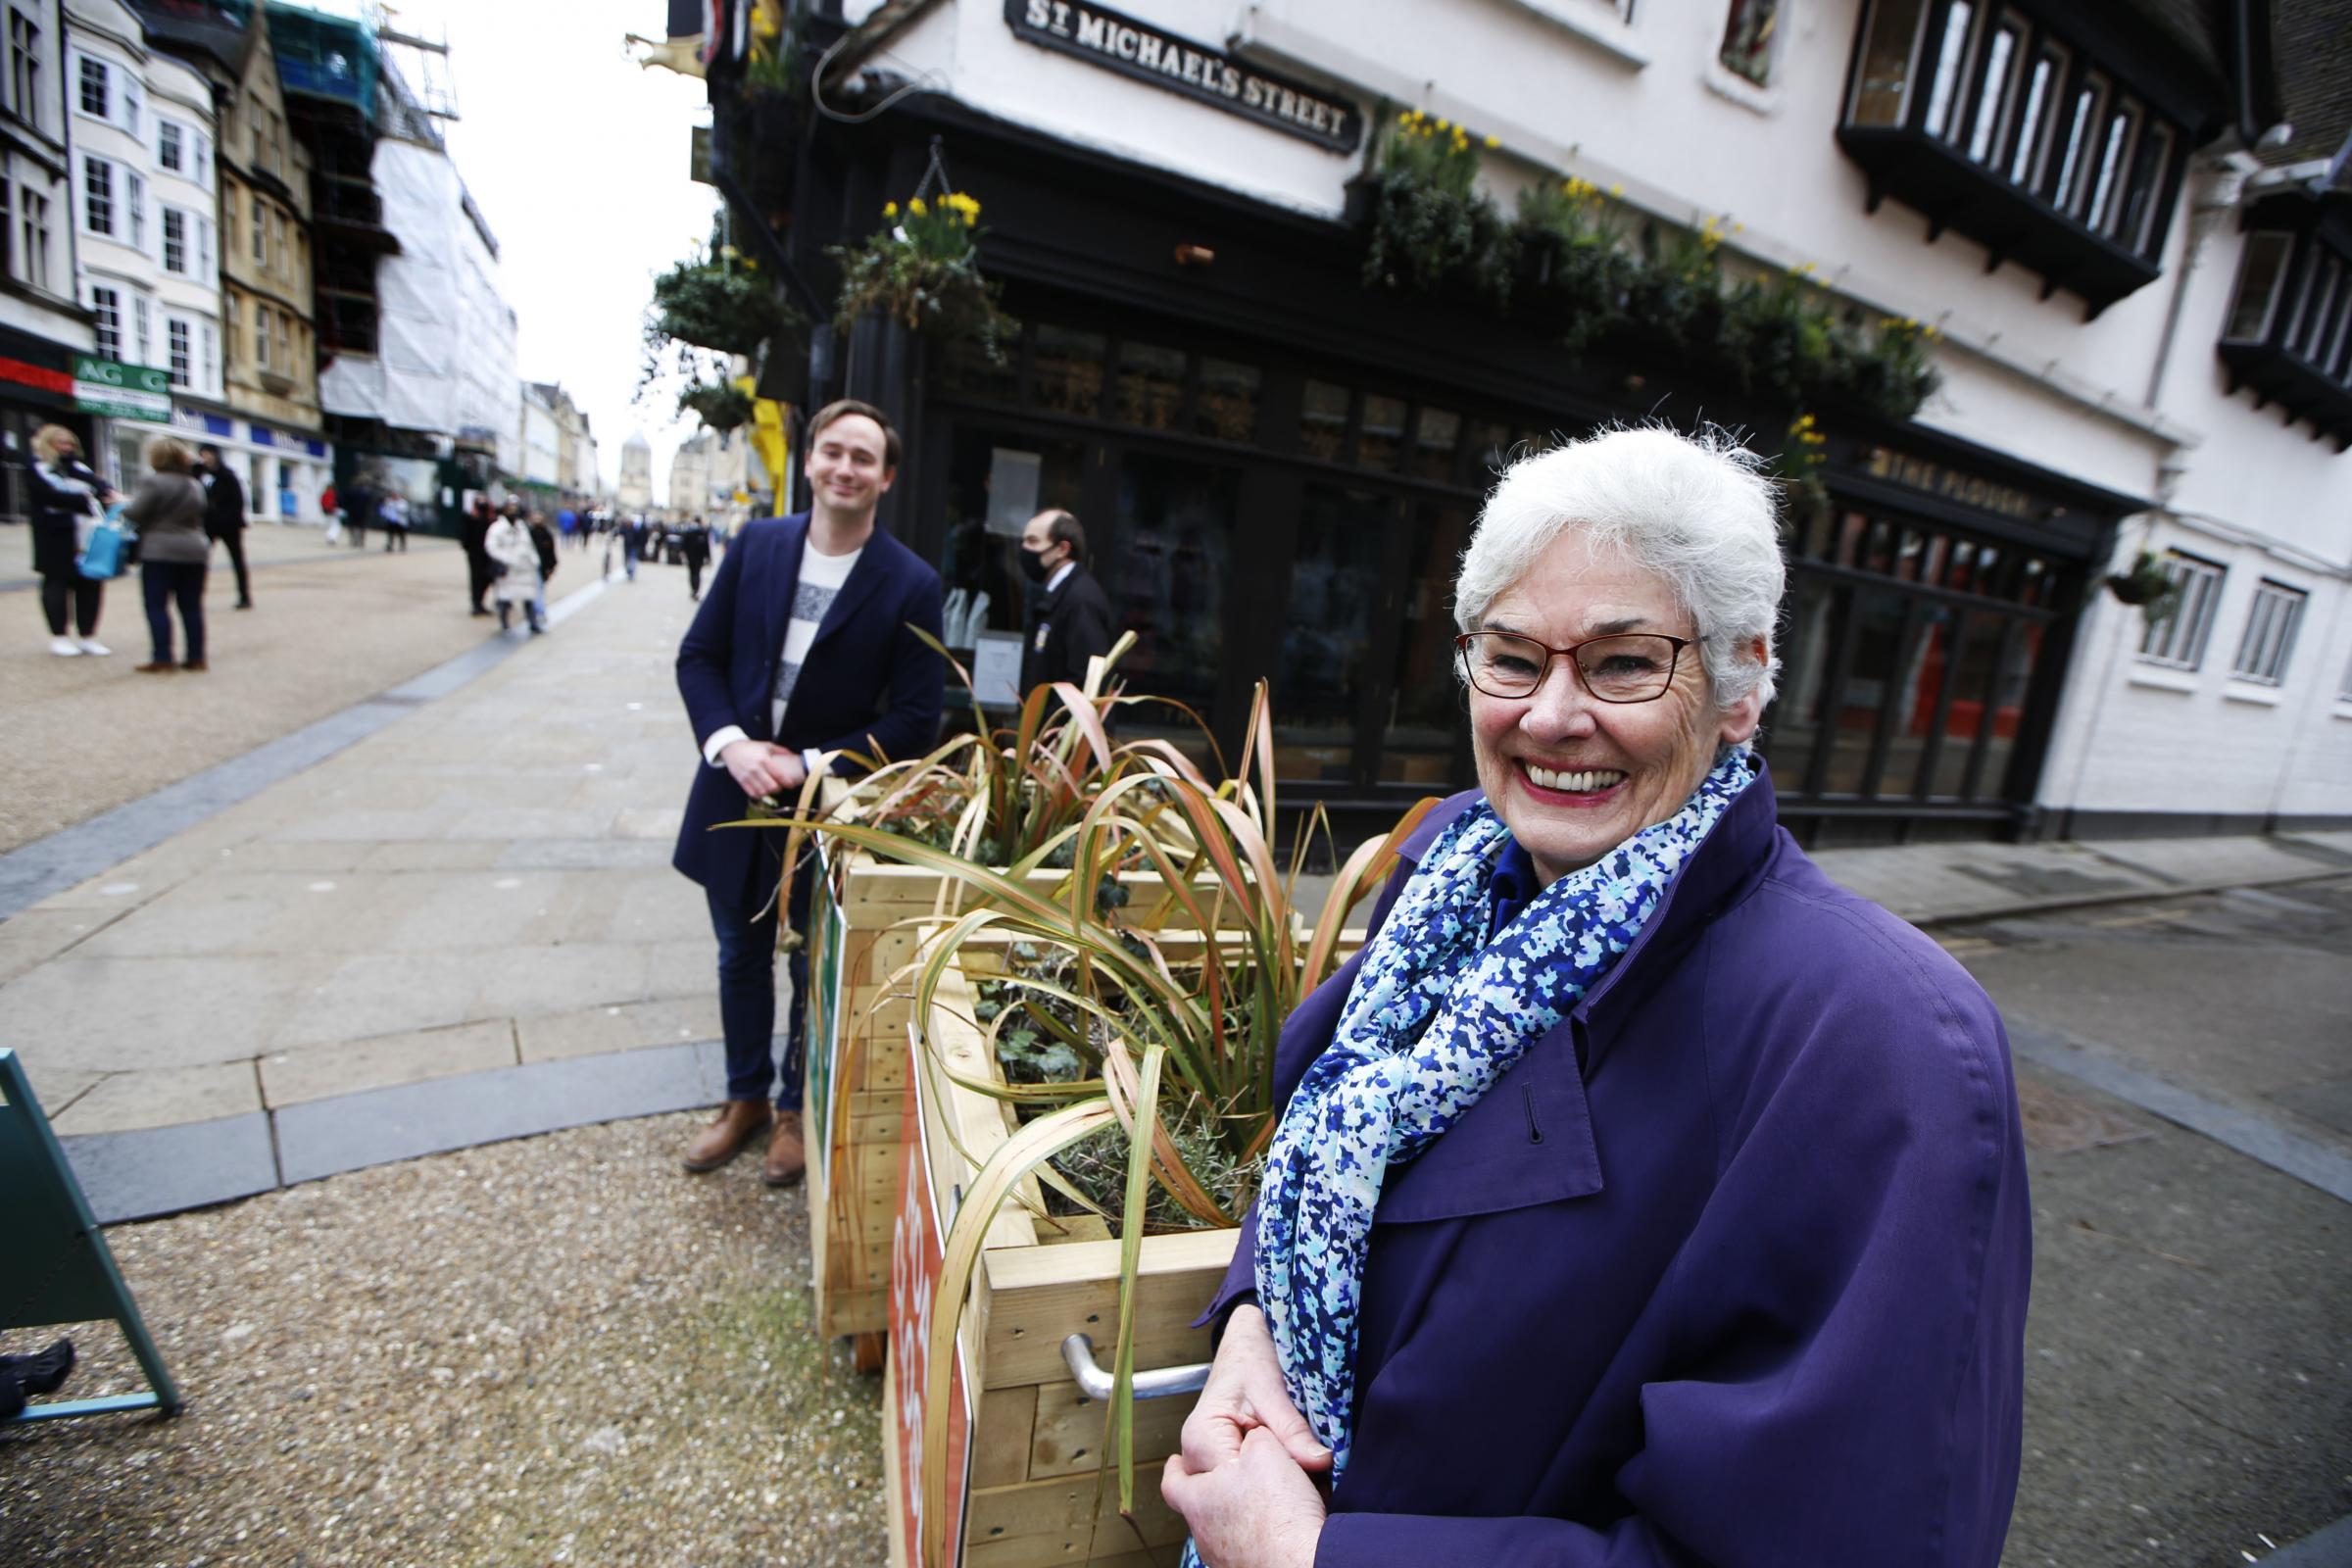 City streets will once again be pedestrianised for hospitality businesses to have outdoor seating from April. Tom Hayes of Oxford City Council, and Yvonne Constance of Oxfordshire County Council photographed on Cornmarket Street. Picture: Ed Nix